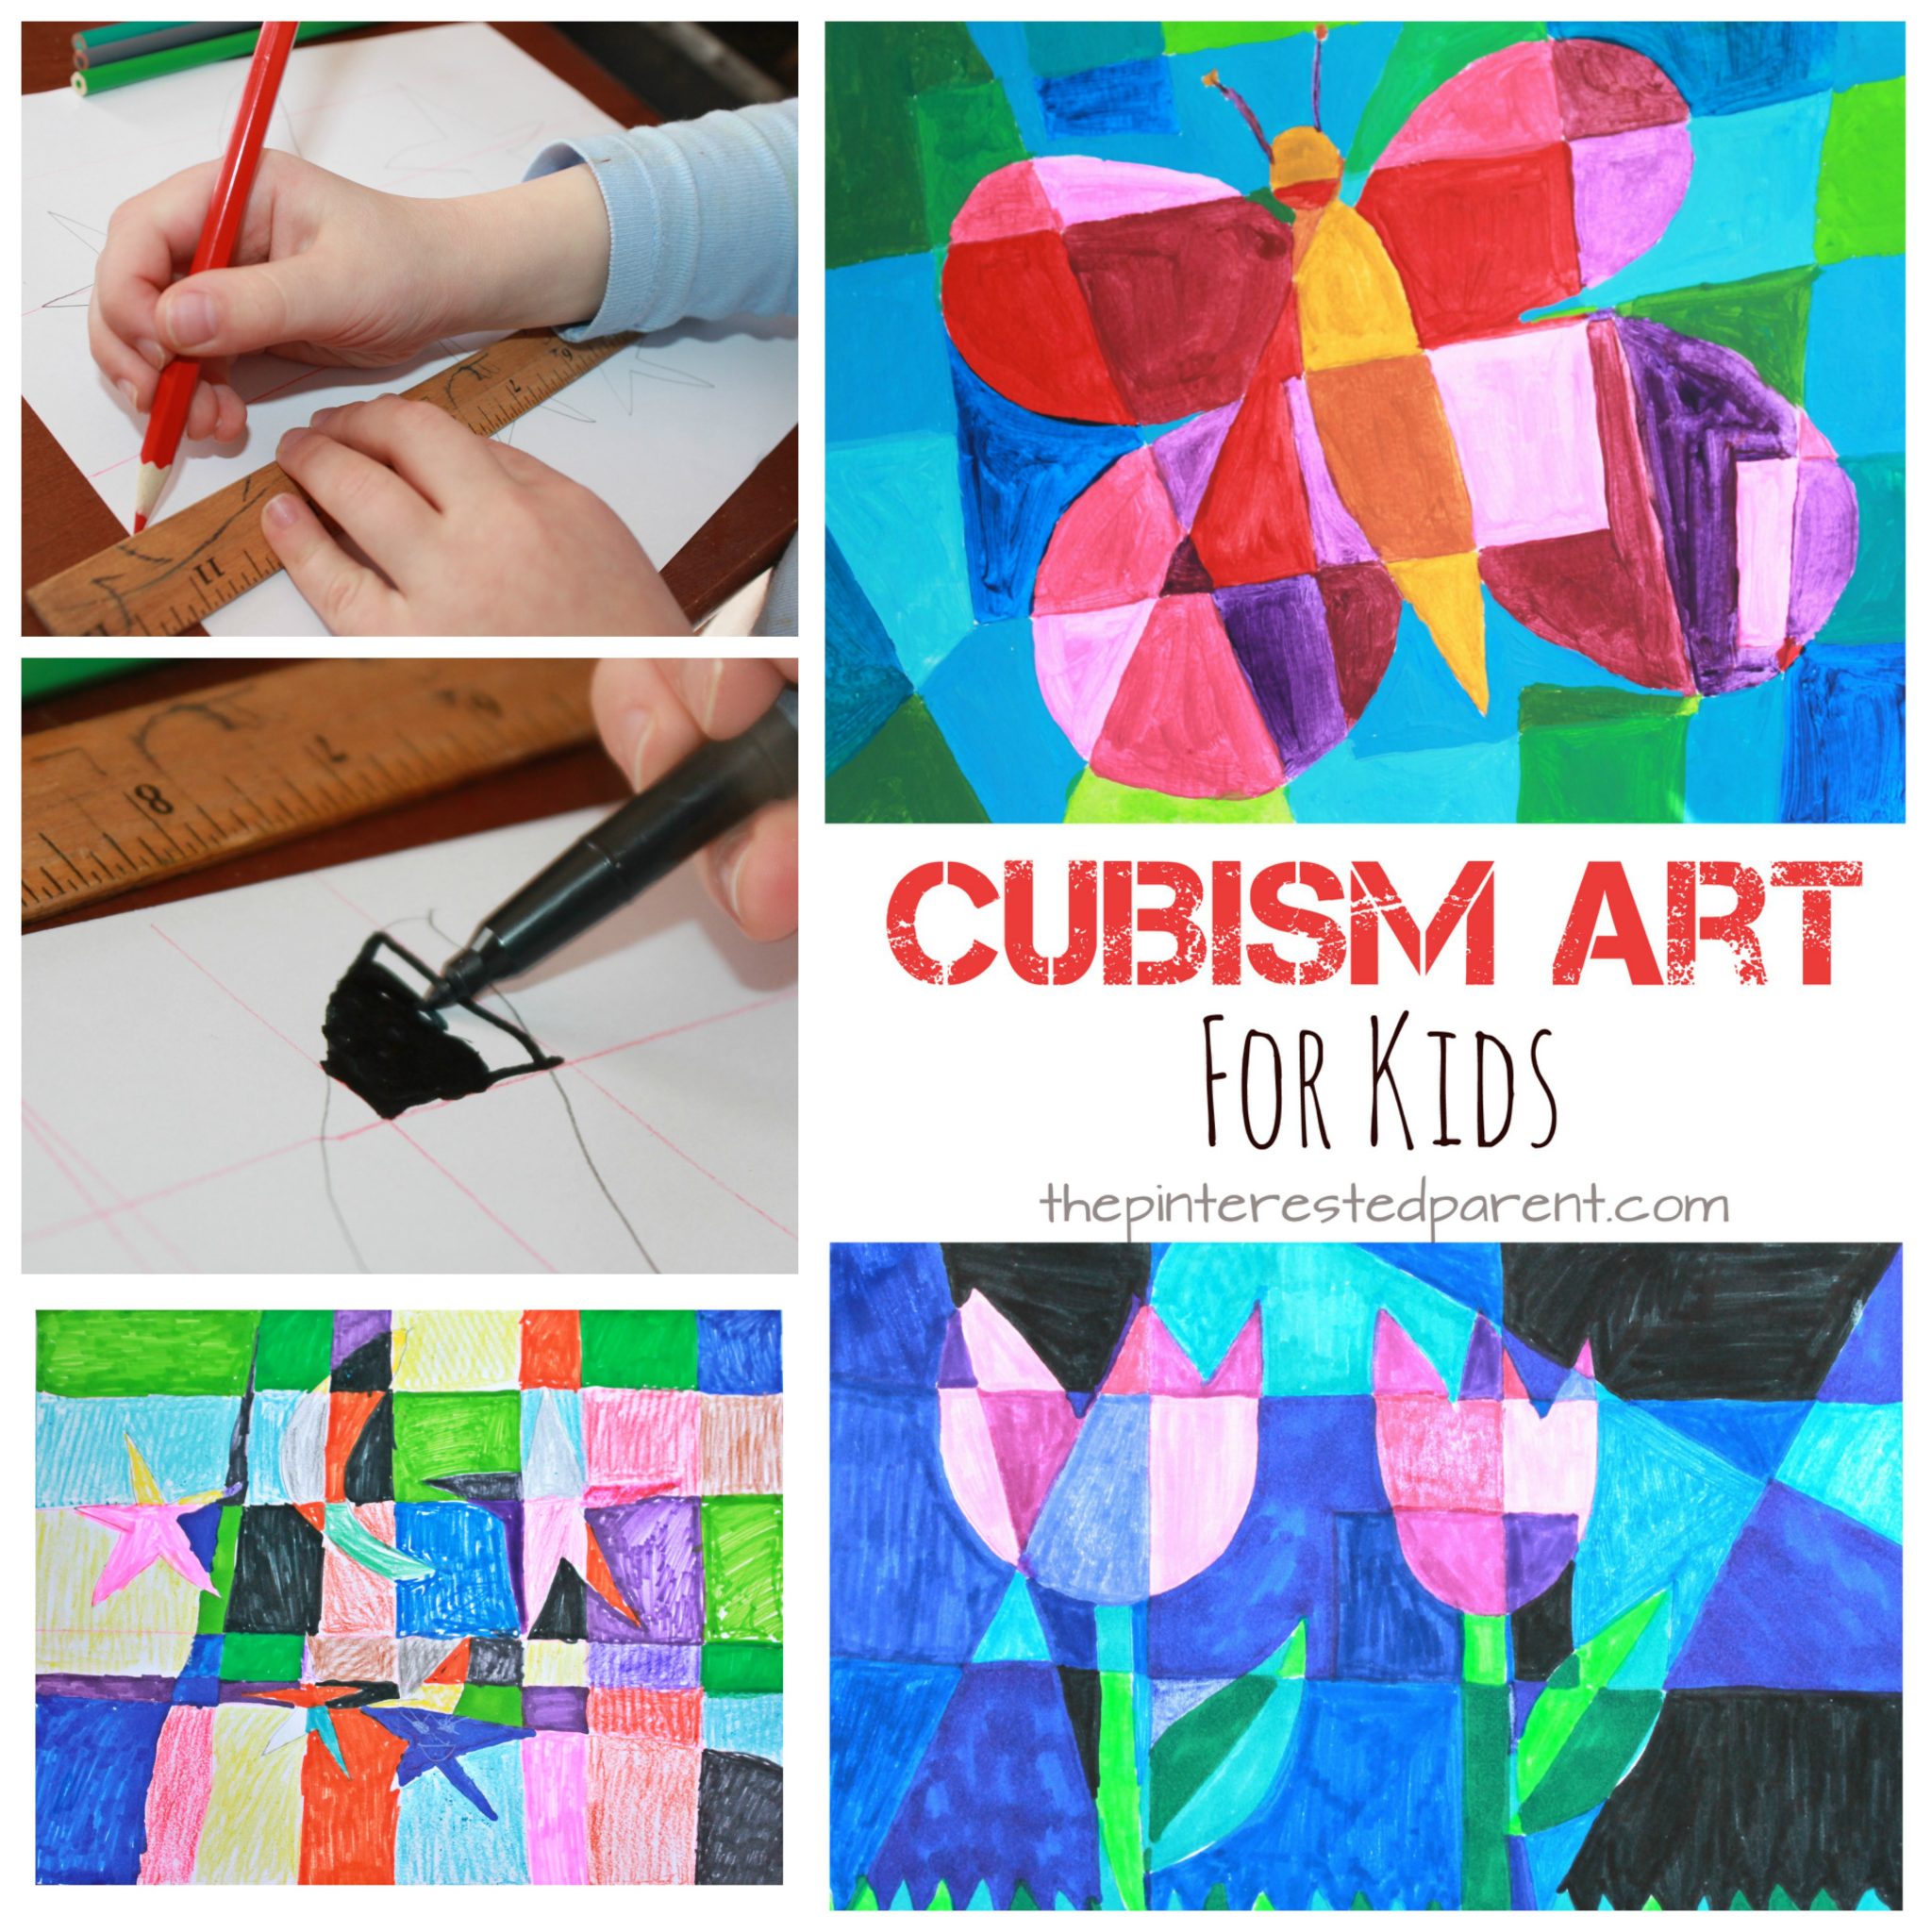 Picasso inspired Cubism art for kids. Spring arts & crafts ideas. Butterflies and tulips - abstract art